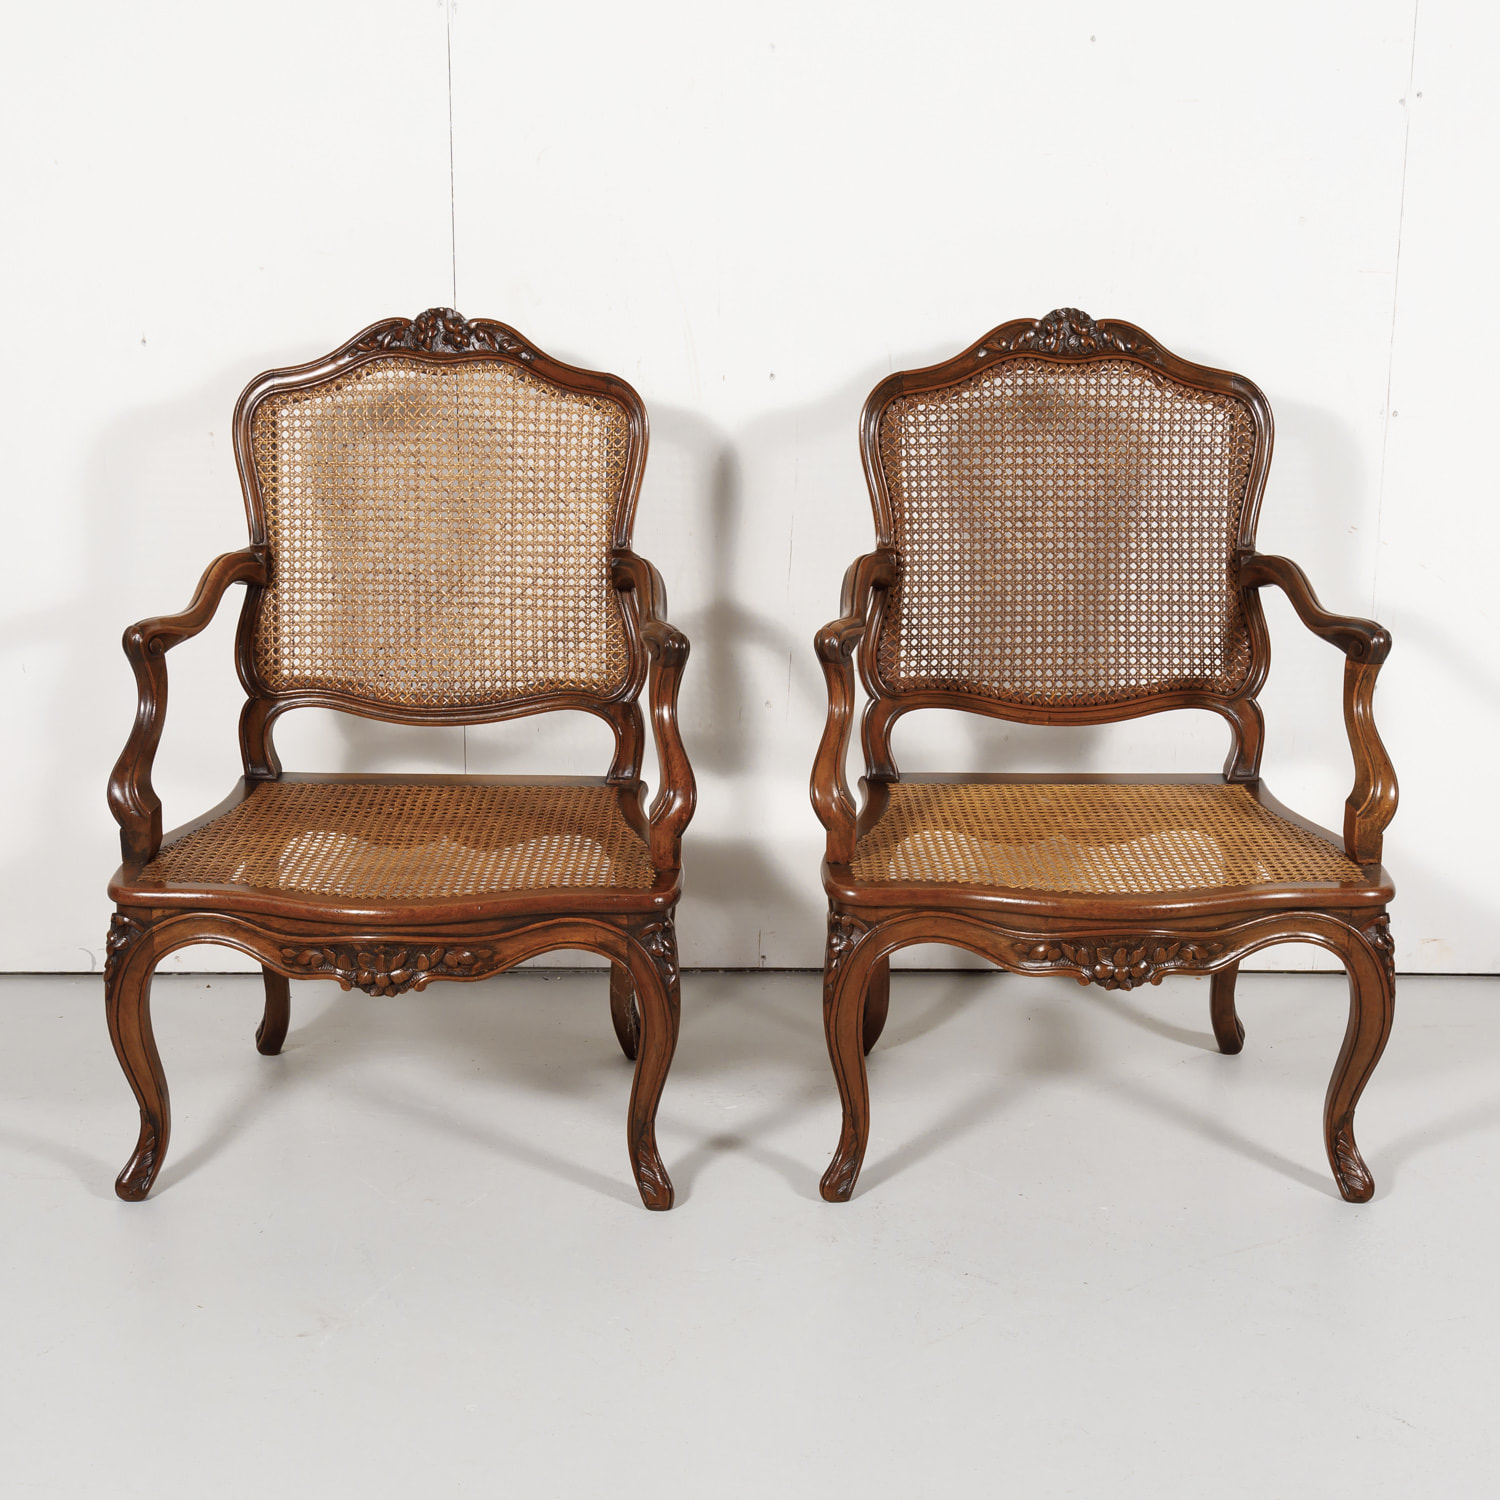 Pair of 19th Century Country French Louis XV Style Walnut and Cane